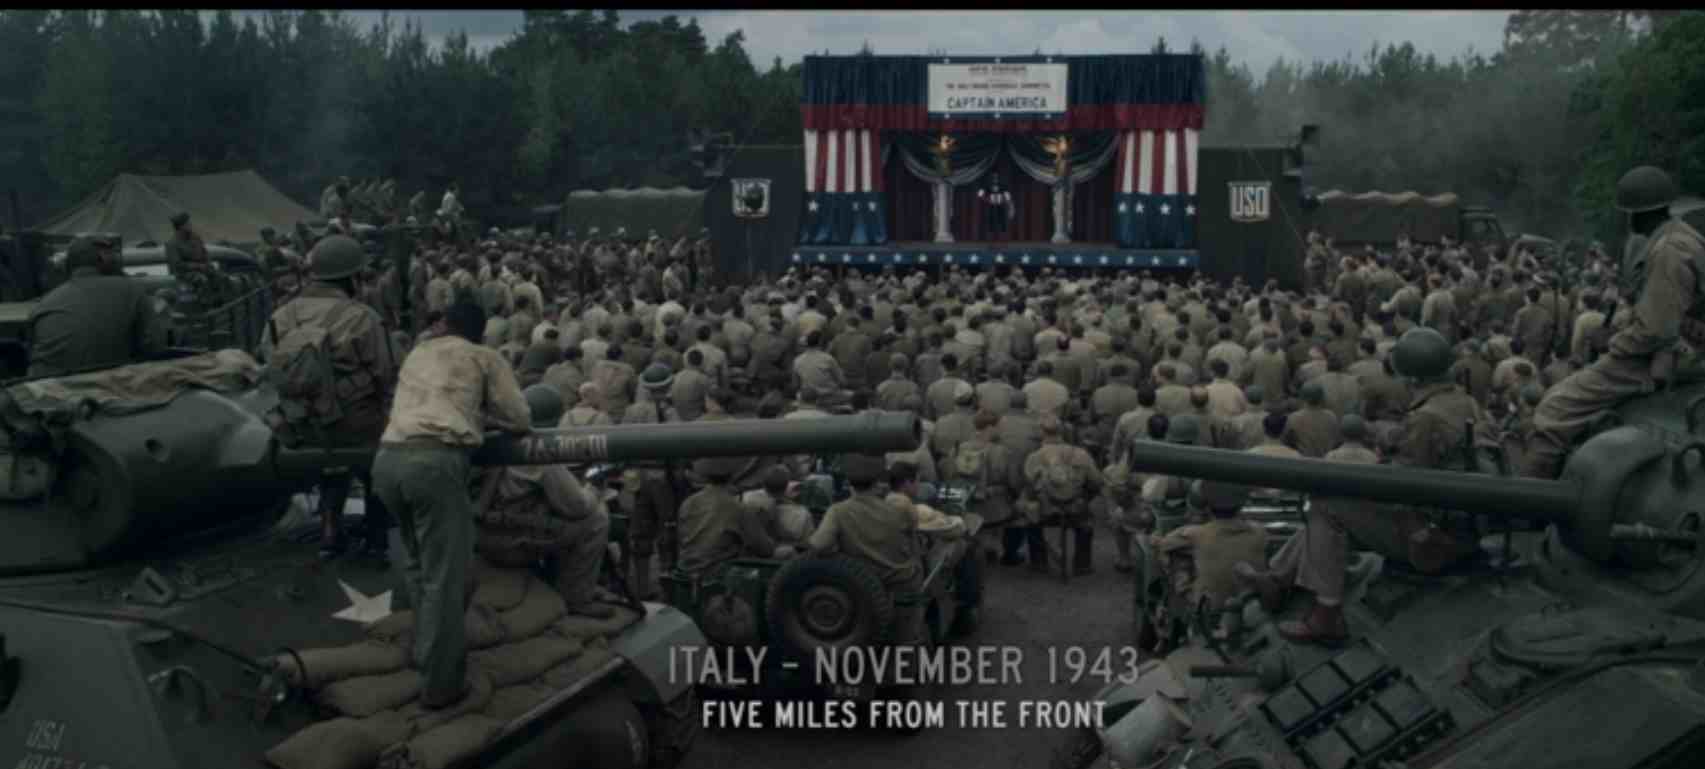 An assembly of soldiers in Italy, on November 1943. They're five miles from the front.